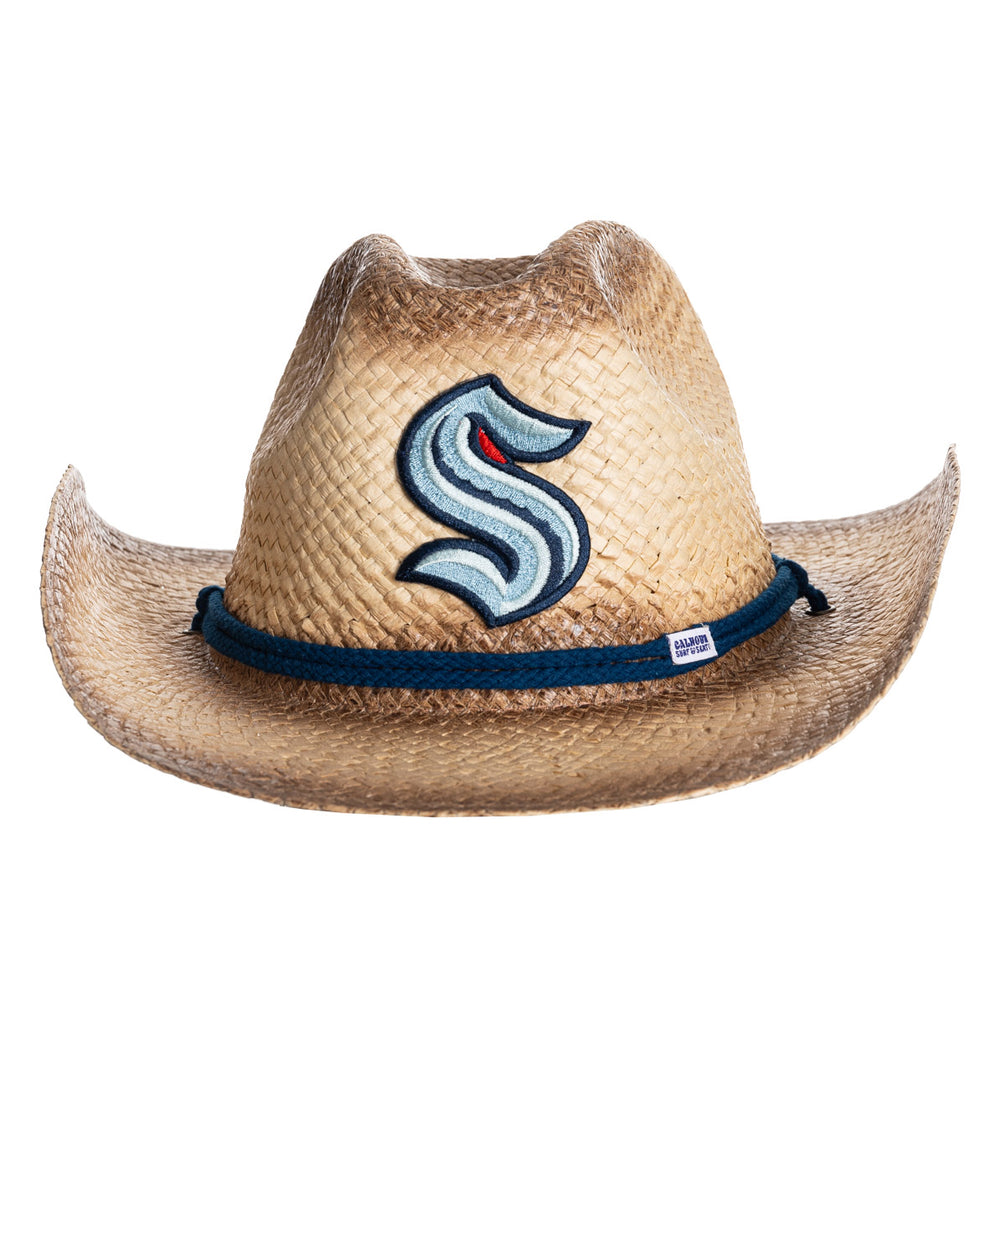 The front of the Seattle Kraken straw cowboy hat. It is a tan straw hat with the Kraken logo in the centre of it, with a navy blue rope running along the crown of the hat.